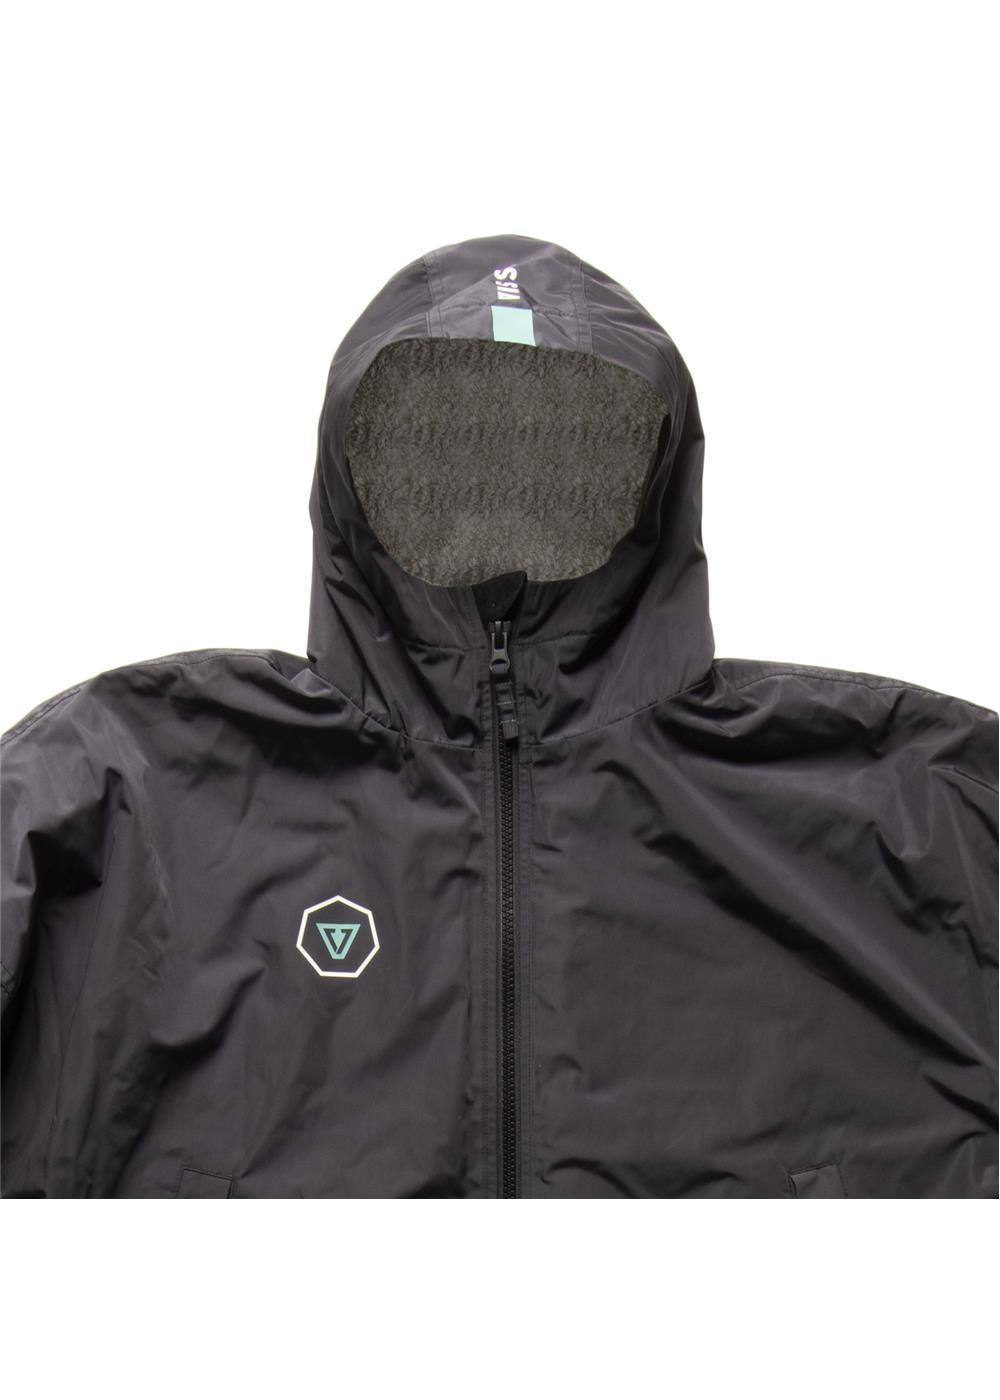 Windbreaker/parka that is perfect for changing